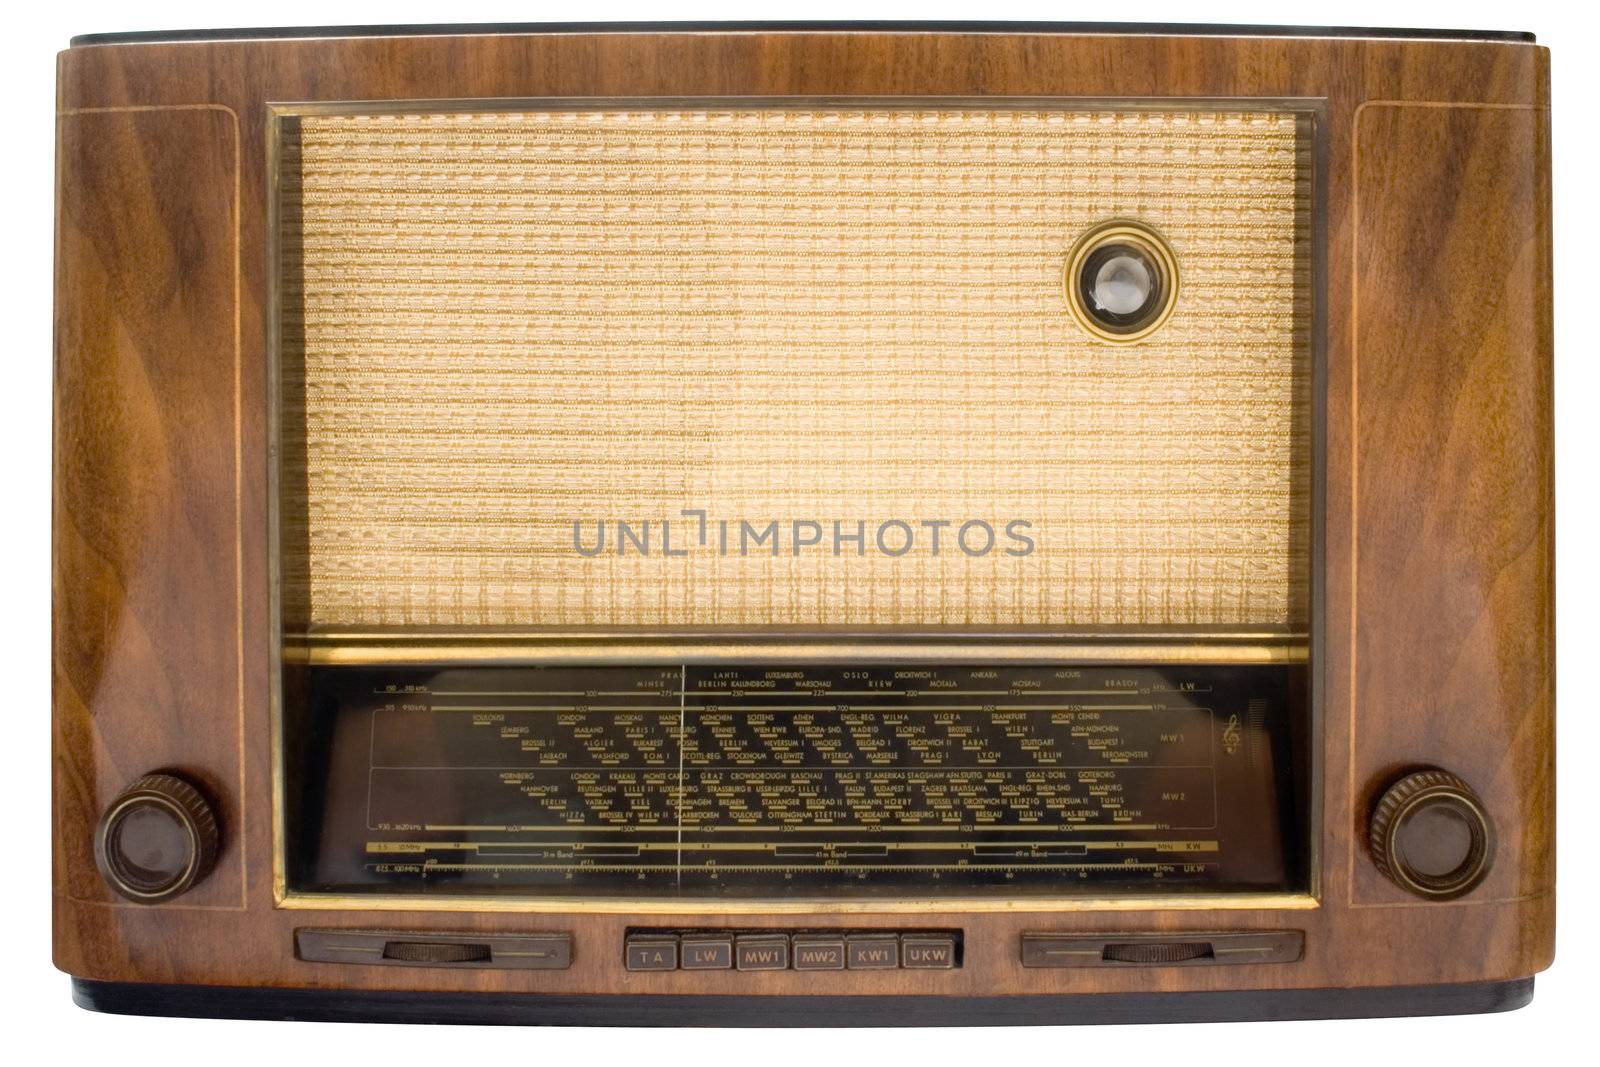 Vintage Tube Radio with Clipping Path by winterling